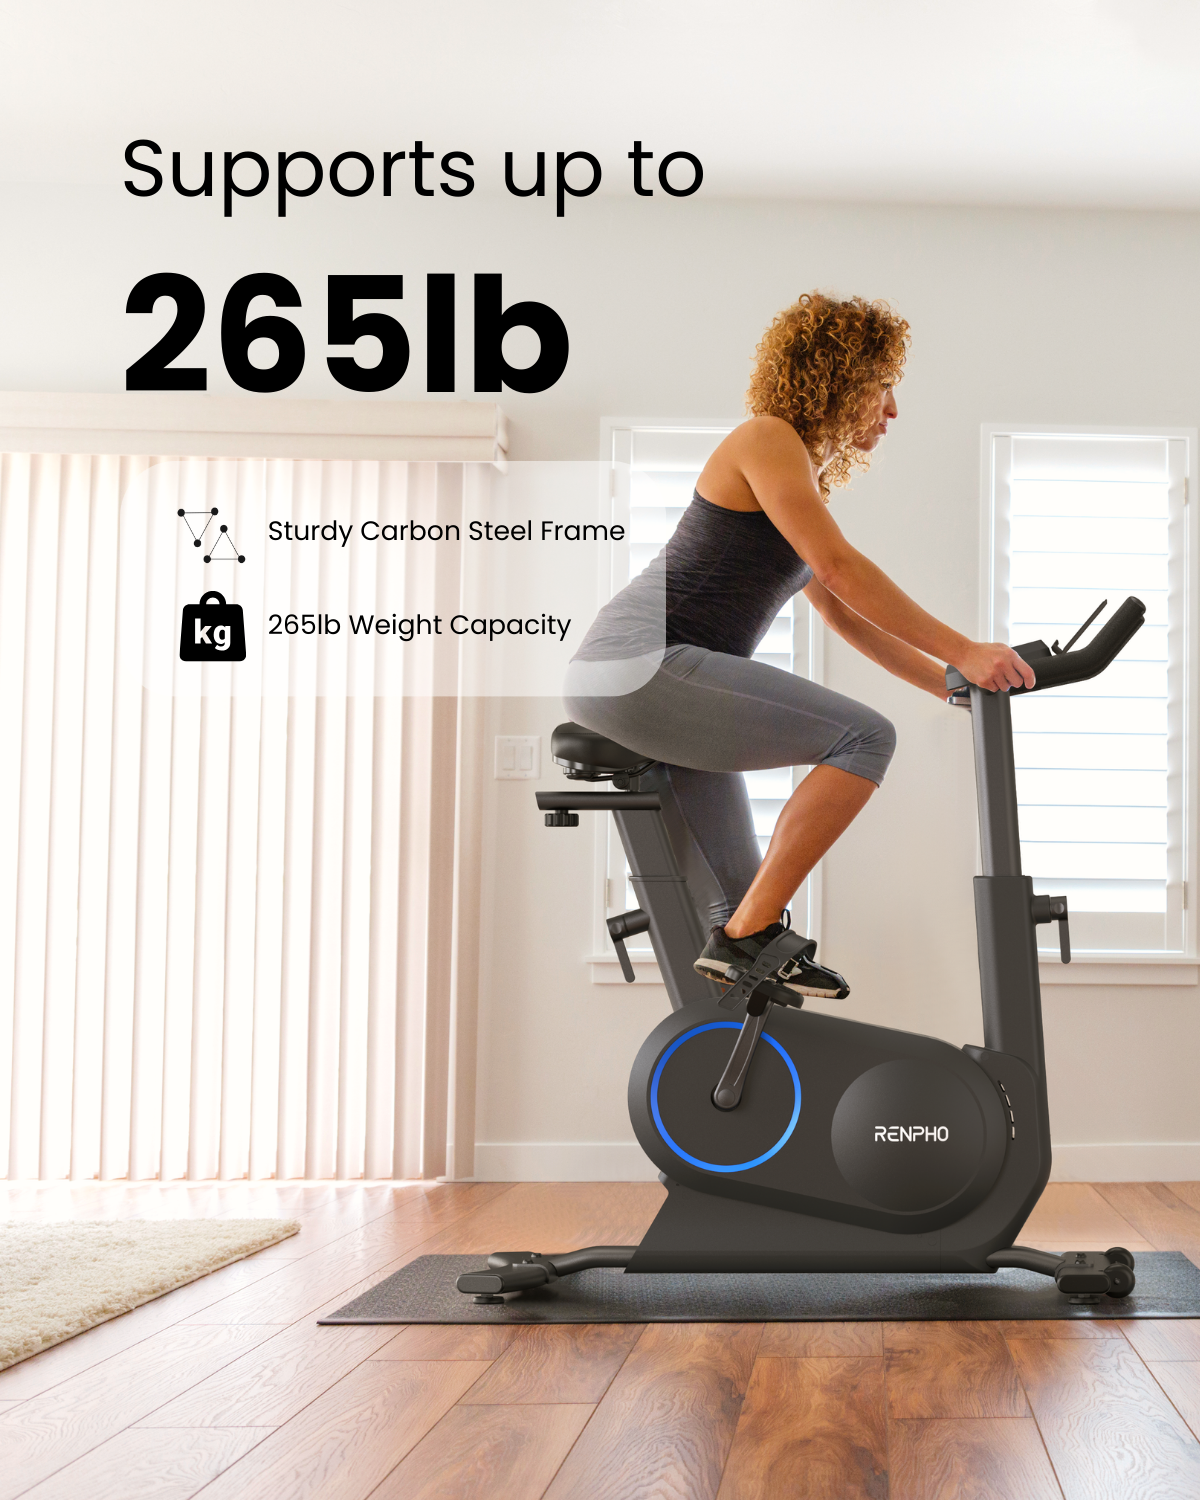 A woman with curly hair is working out on a Renpho EU AI Smart Bike S in a well-lit home interior. The image highlights the bike's features like its 265 lb weight capacity and sturdy carbon steel frame.